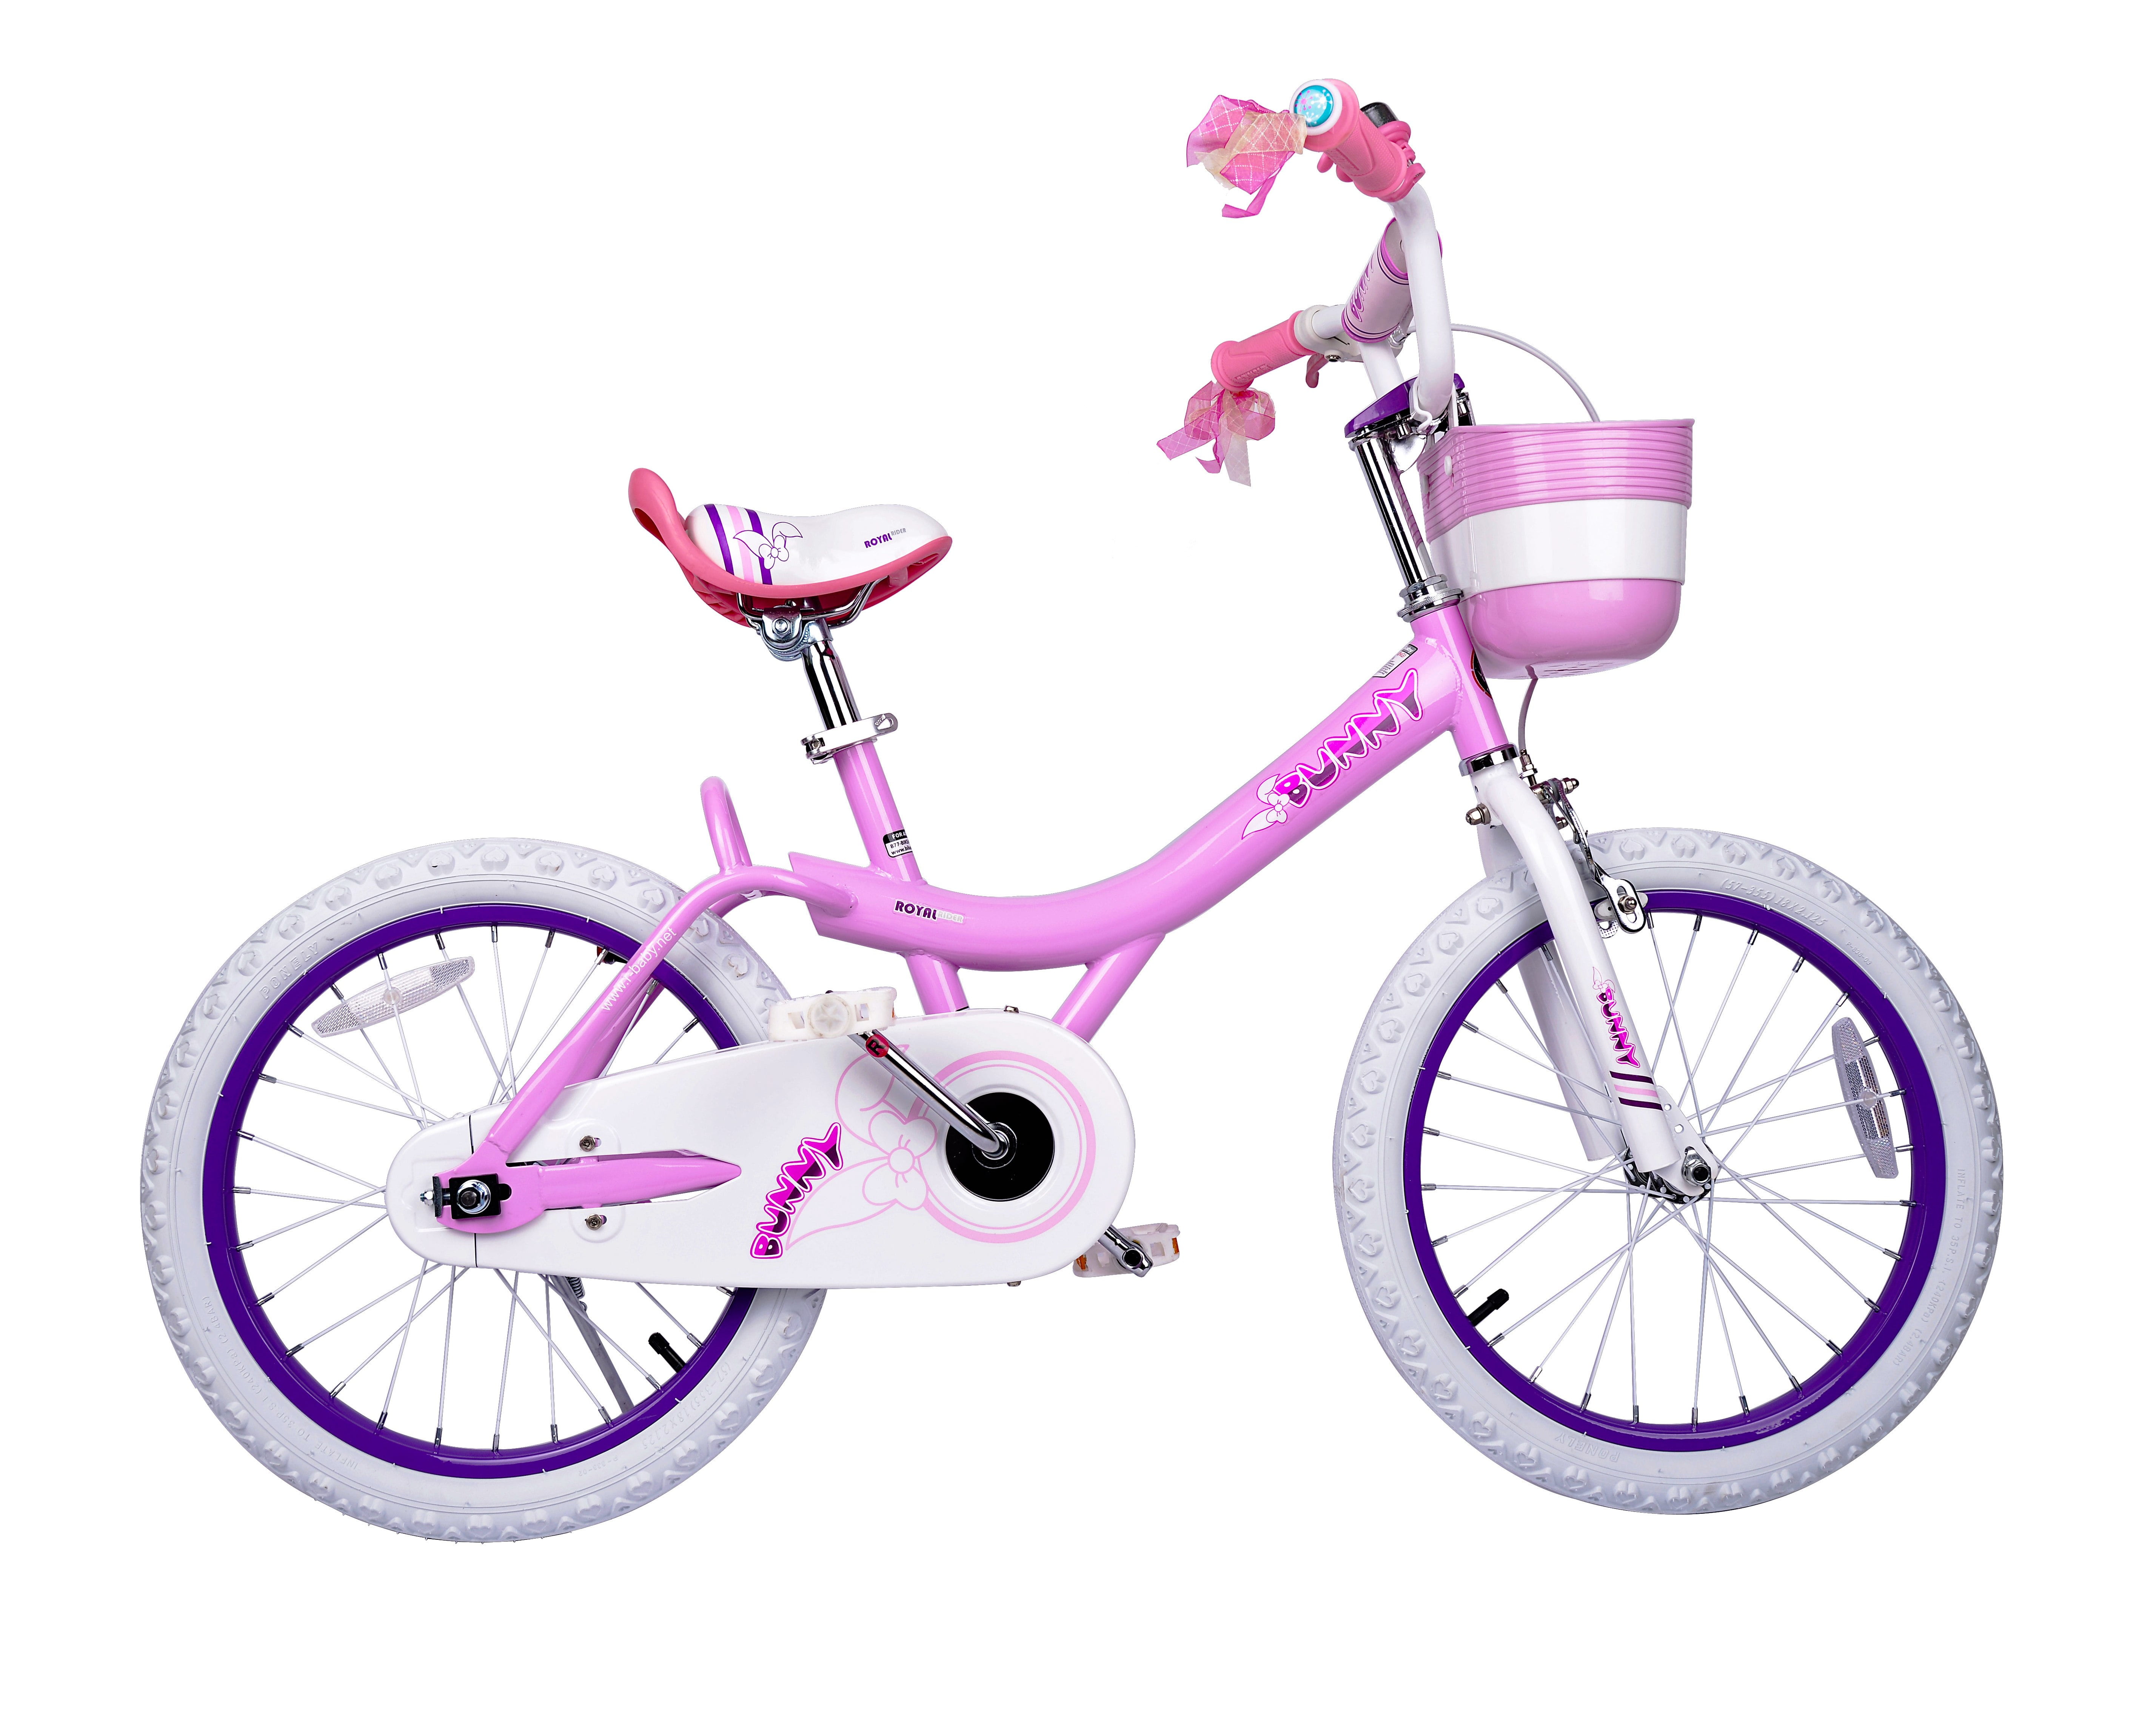 RoyalBaby Bunny 18 inch Girl's Bicycle Kids Bike for Girls Childrens Bicycle Pink With Kickstand